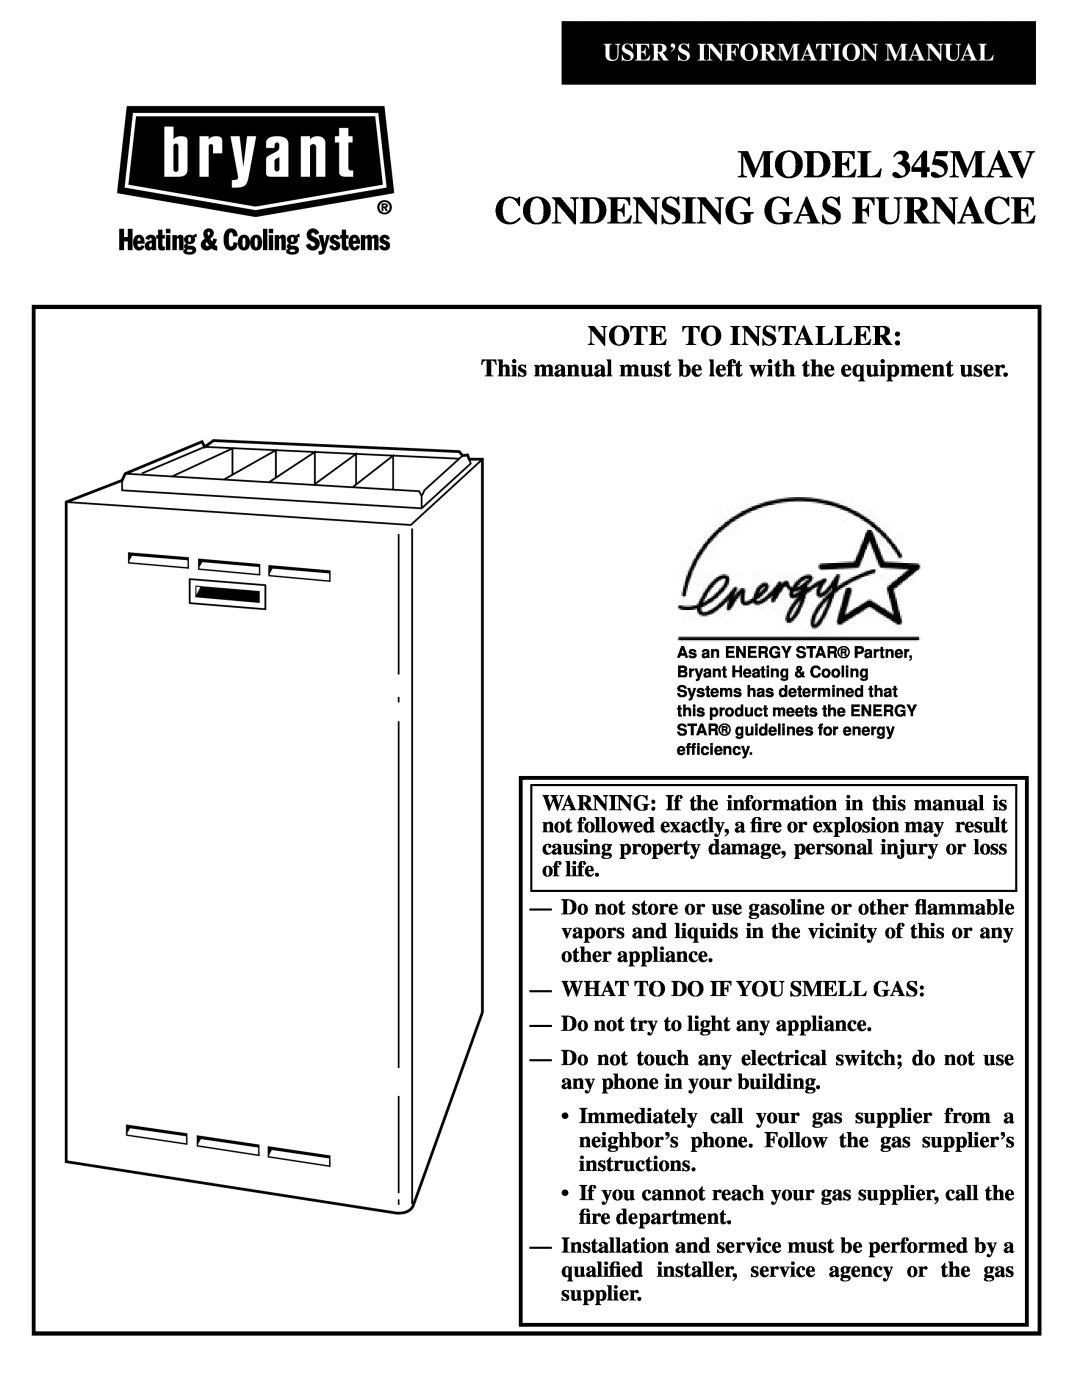 Bryant manual This manual must be left with the equipment user, MODEL 345MAV CONDENSING GAS FURNACE, Note To Installer 